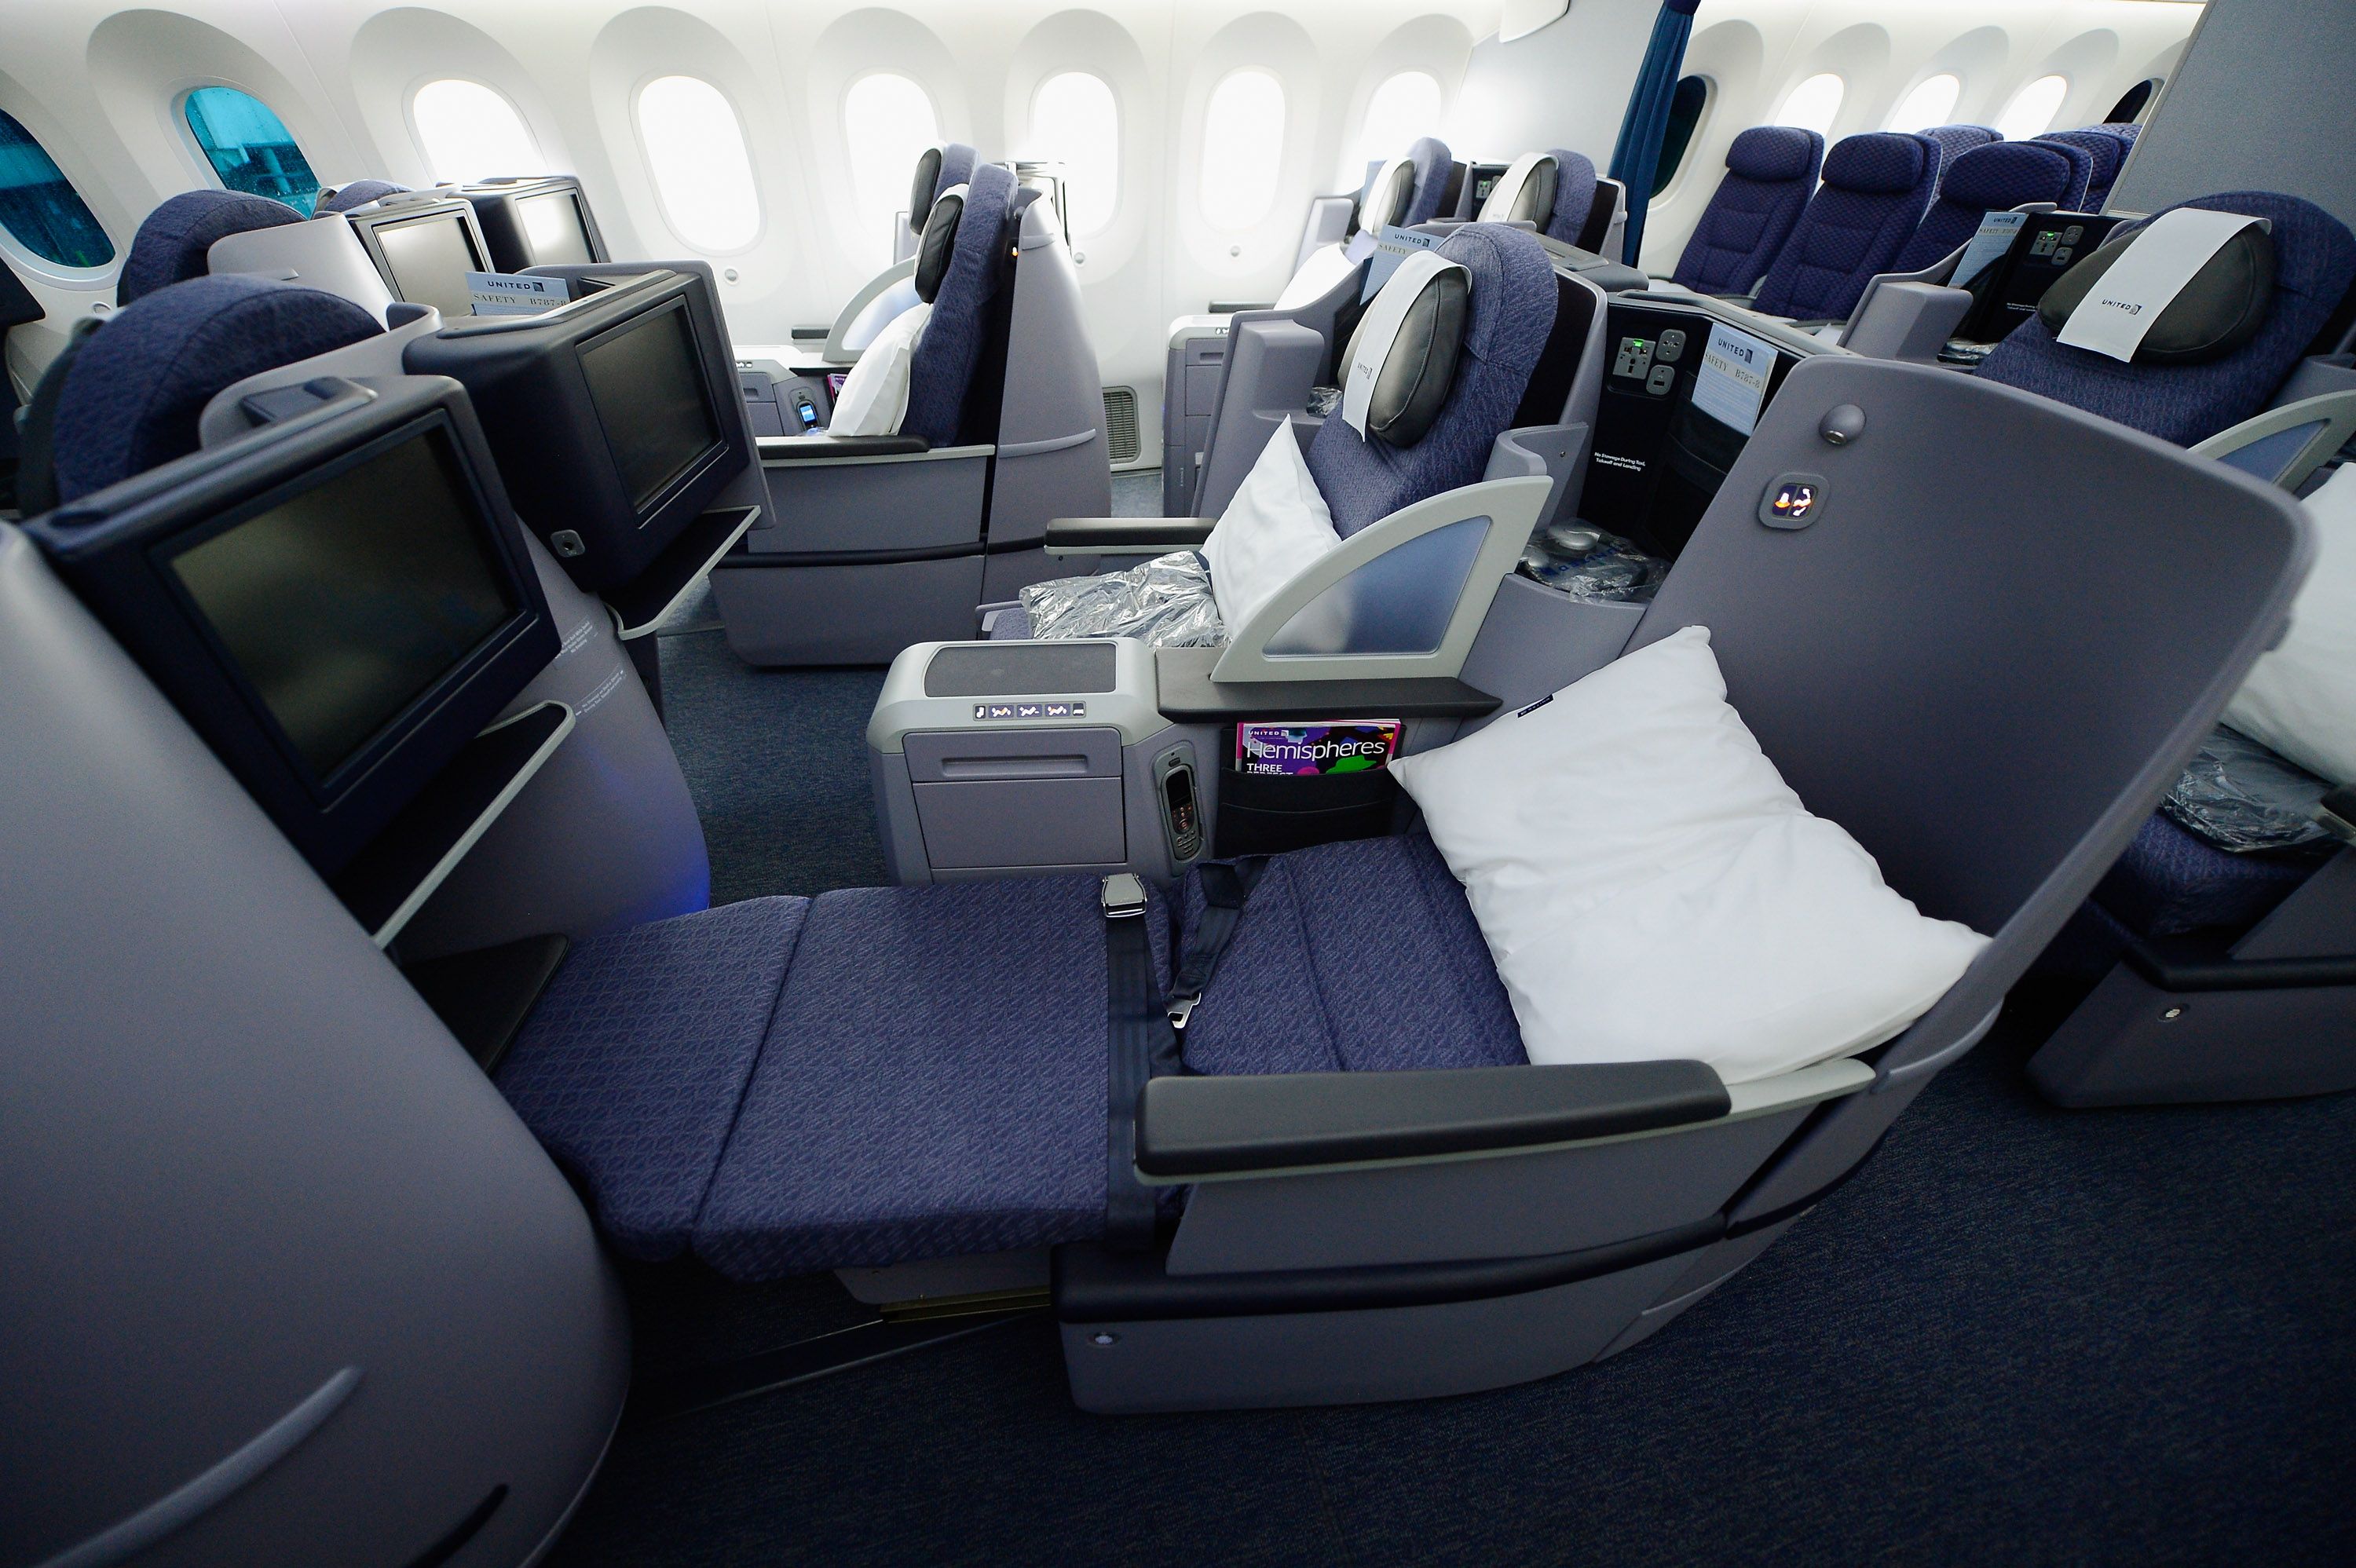 United Airlines business class